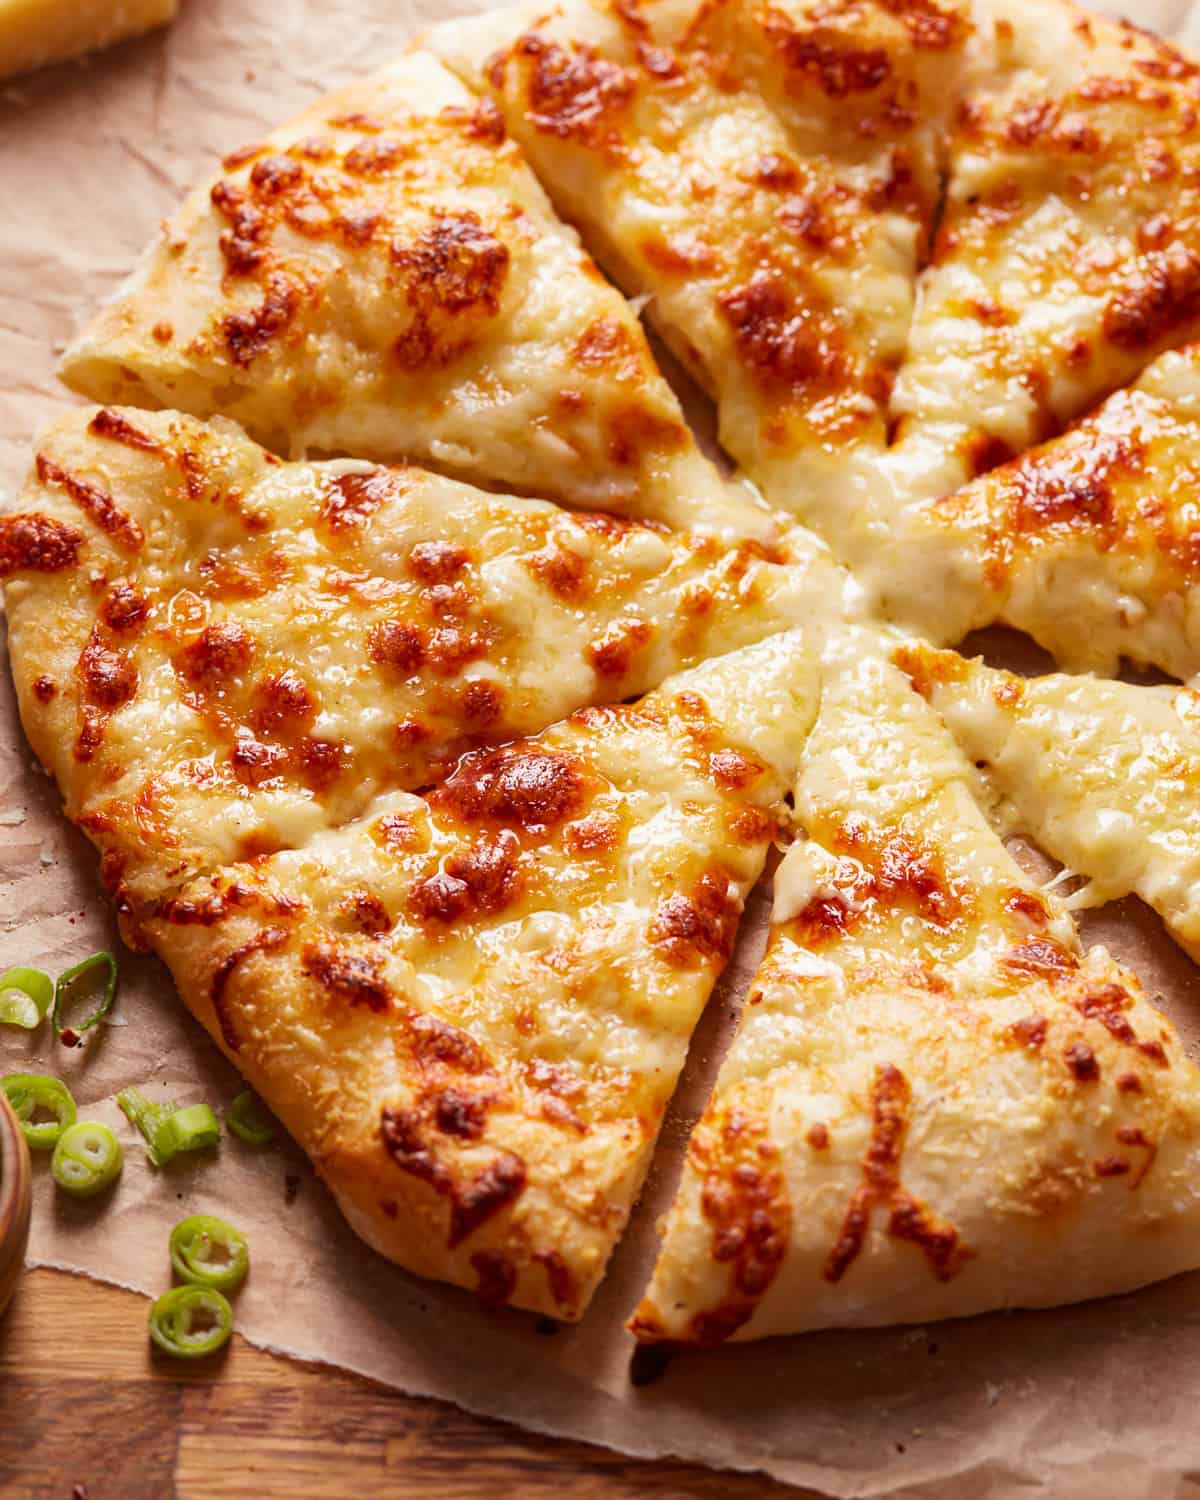 A pizza with cheese and green onions on a wooden board.